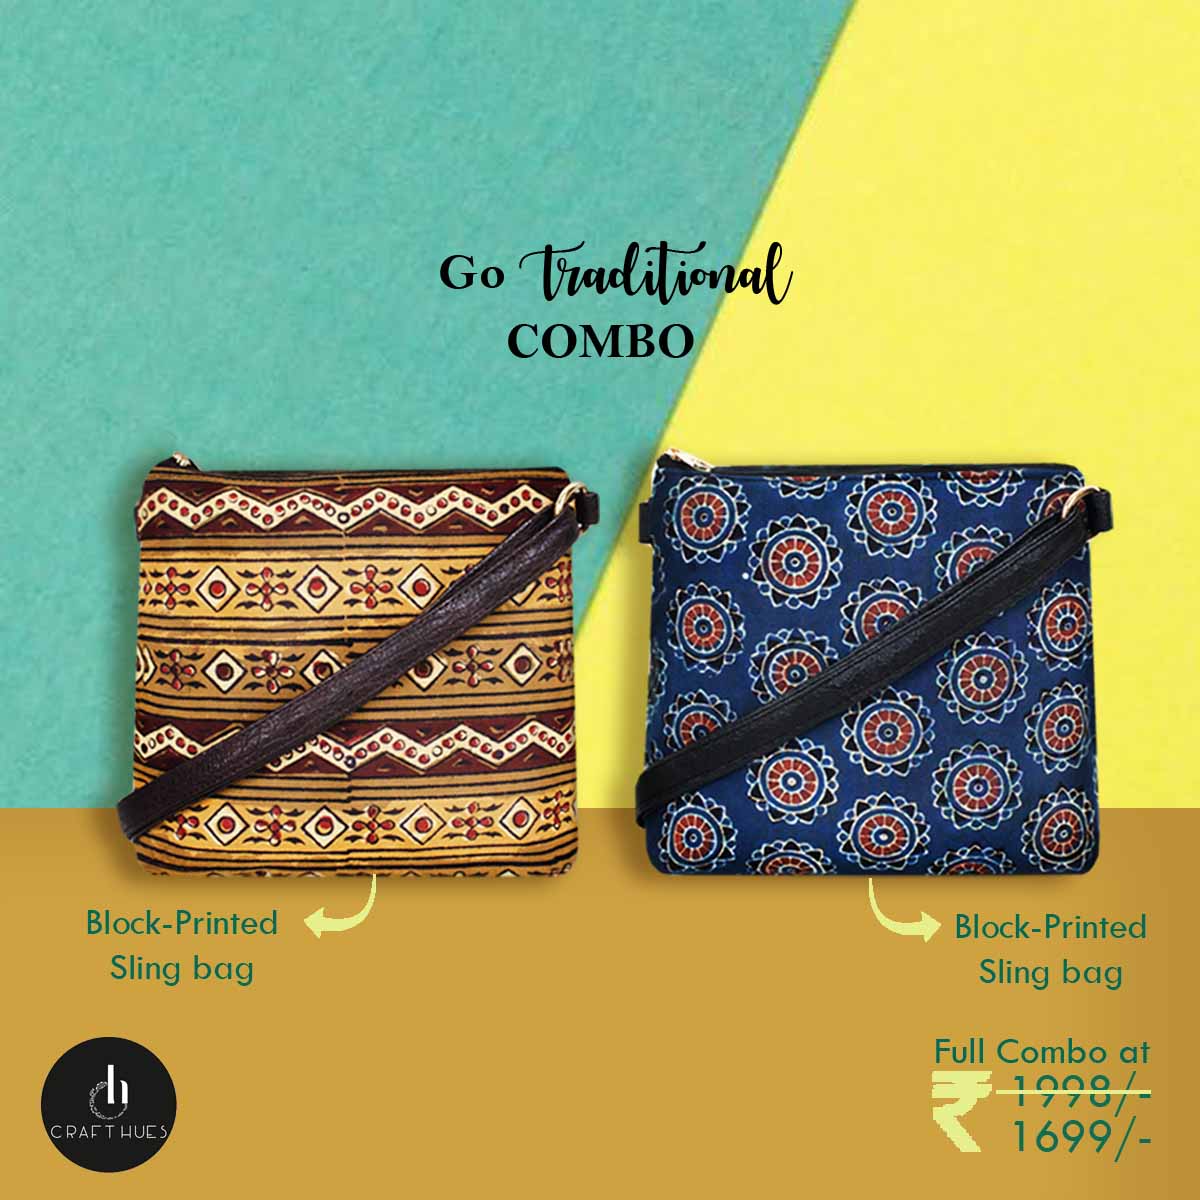 Go Traditional Sling Bags Combo